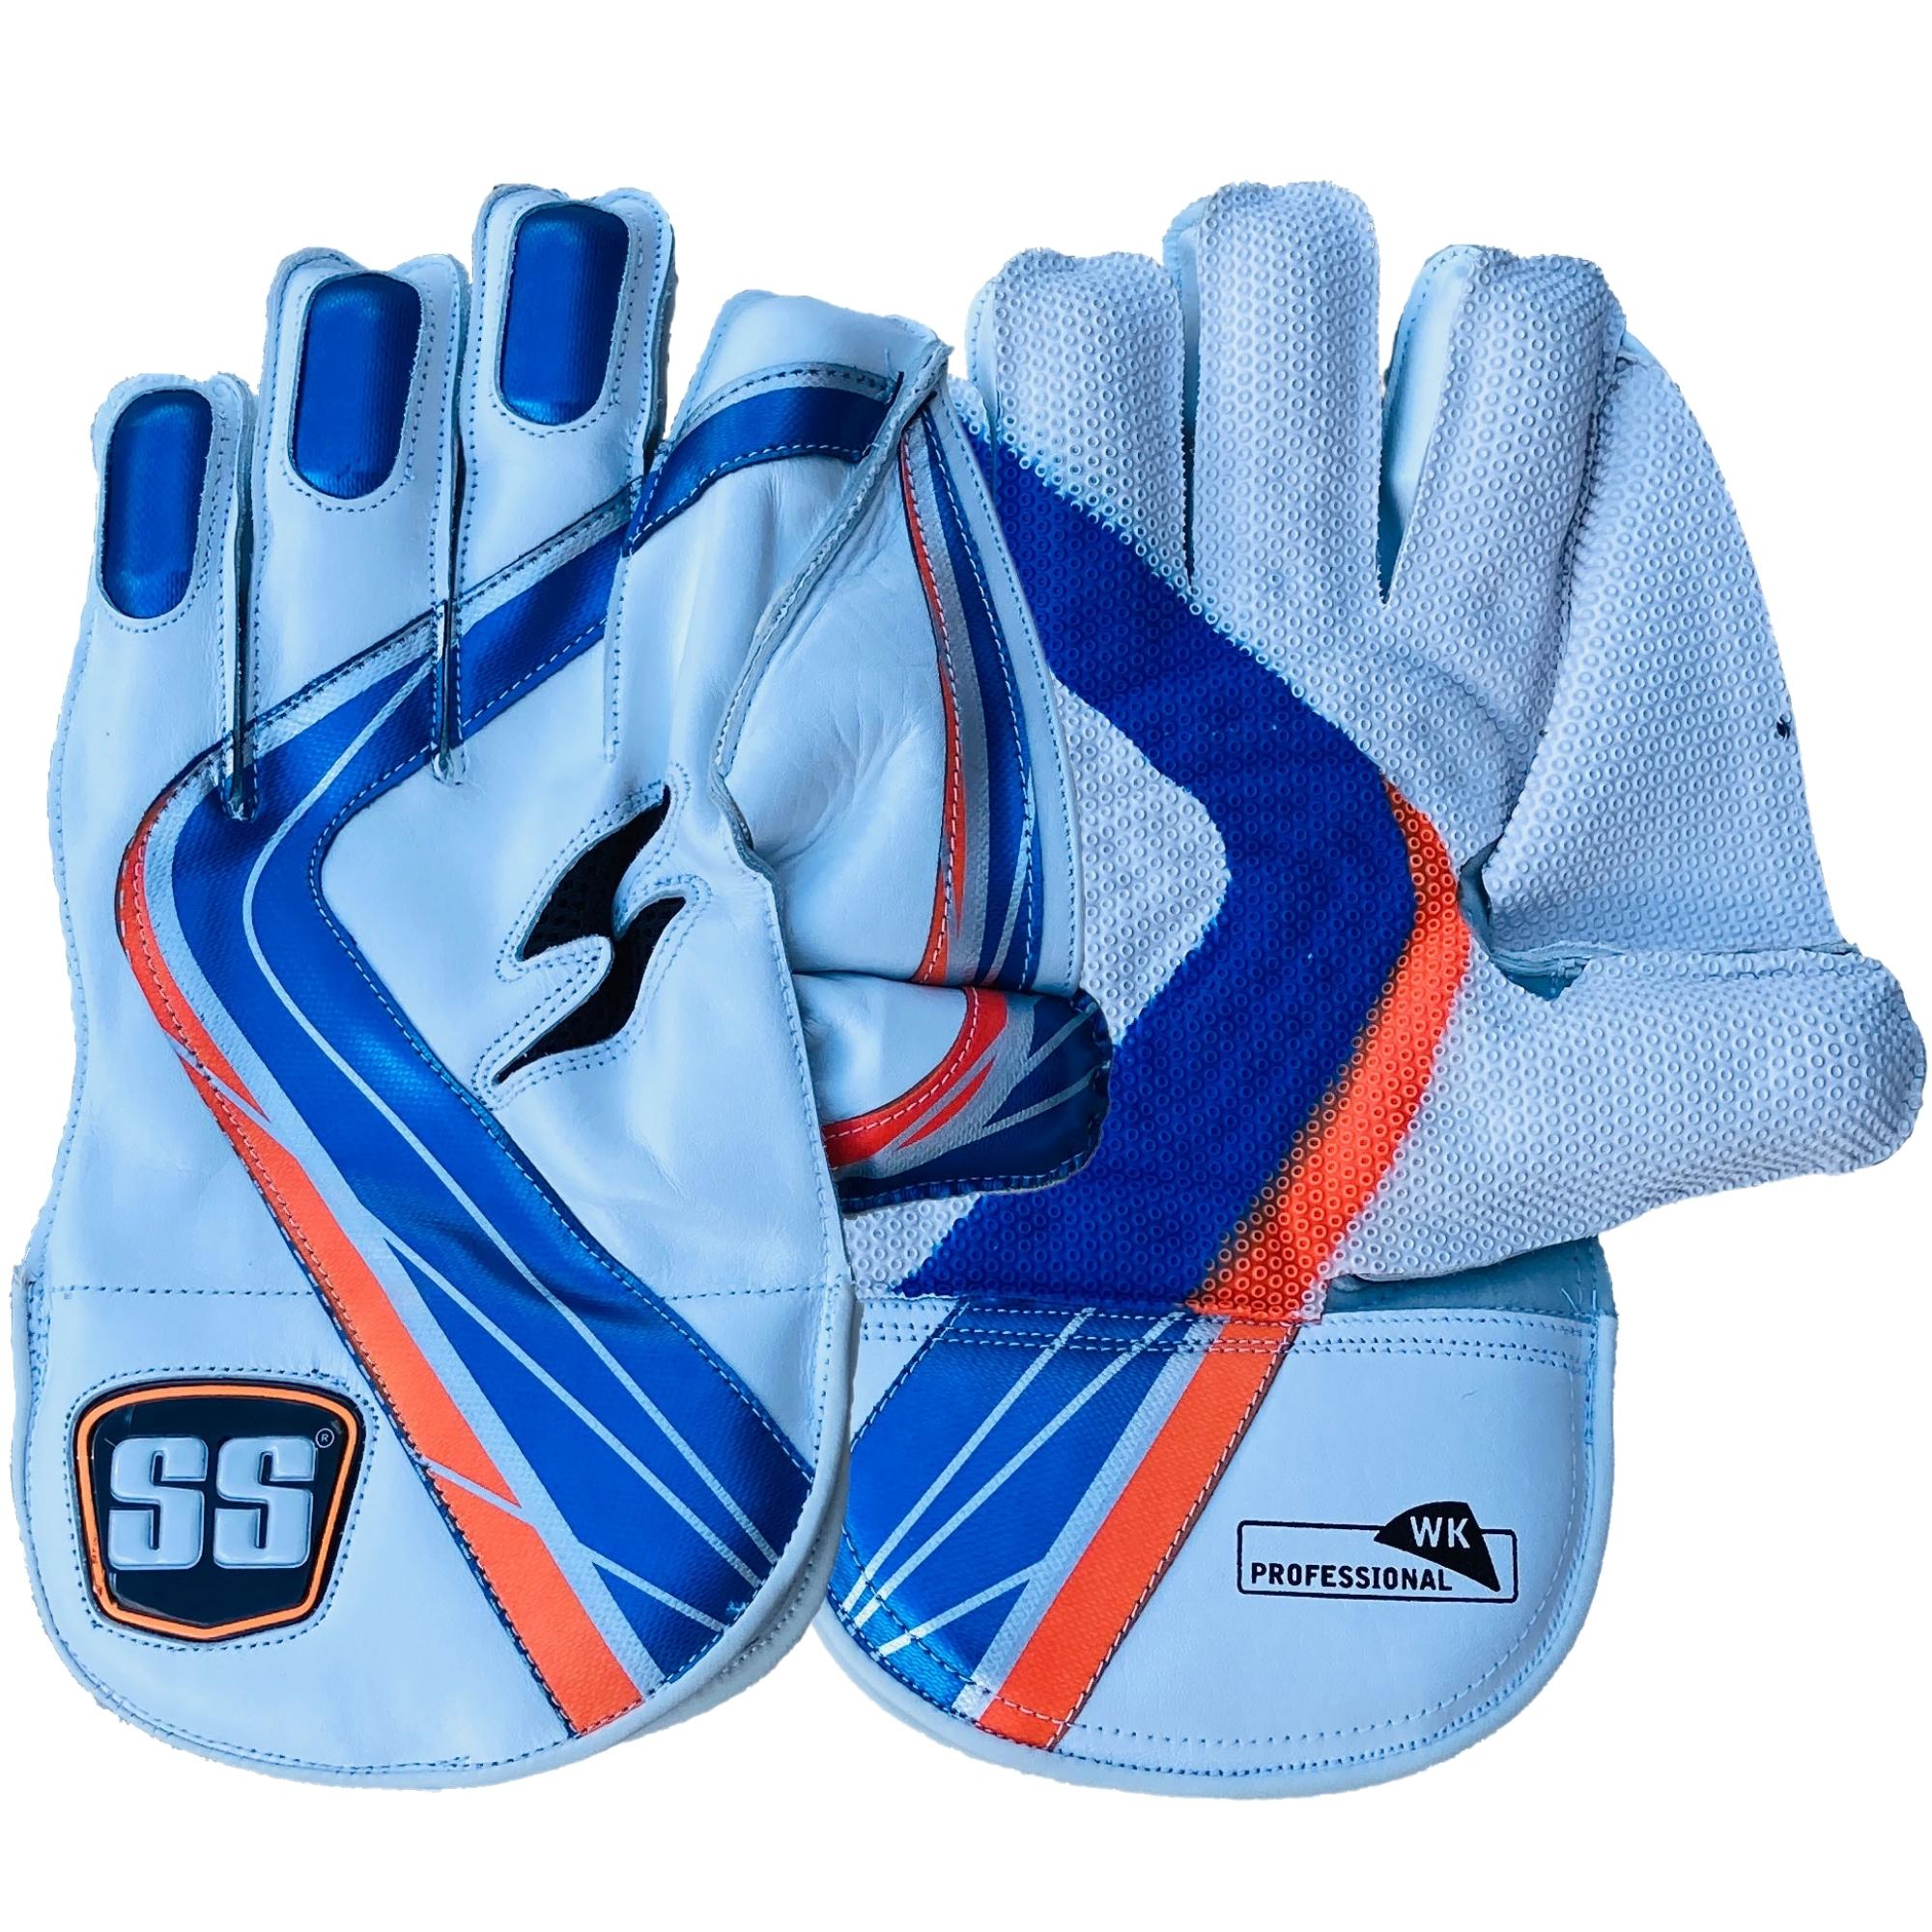 SS Wicket Keeping Gloves | SS Professional